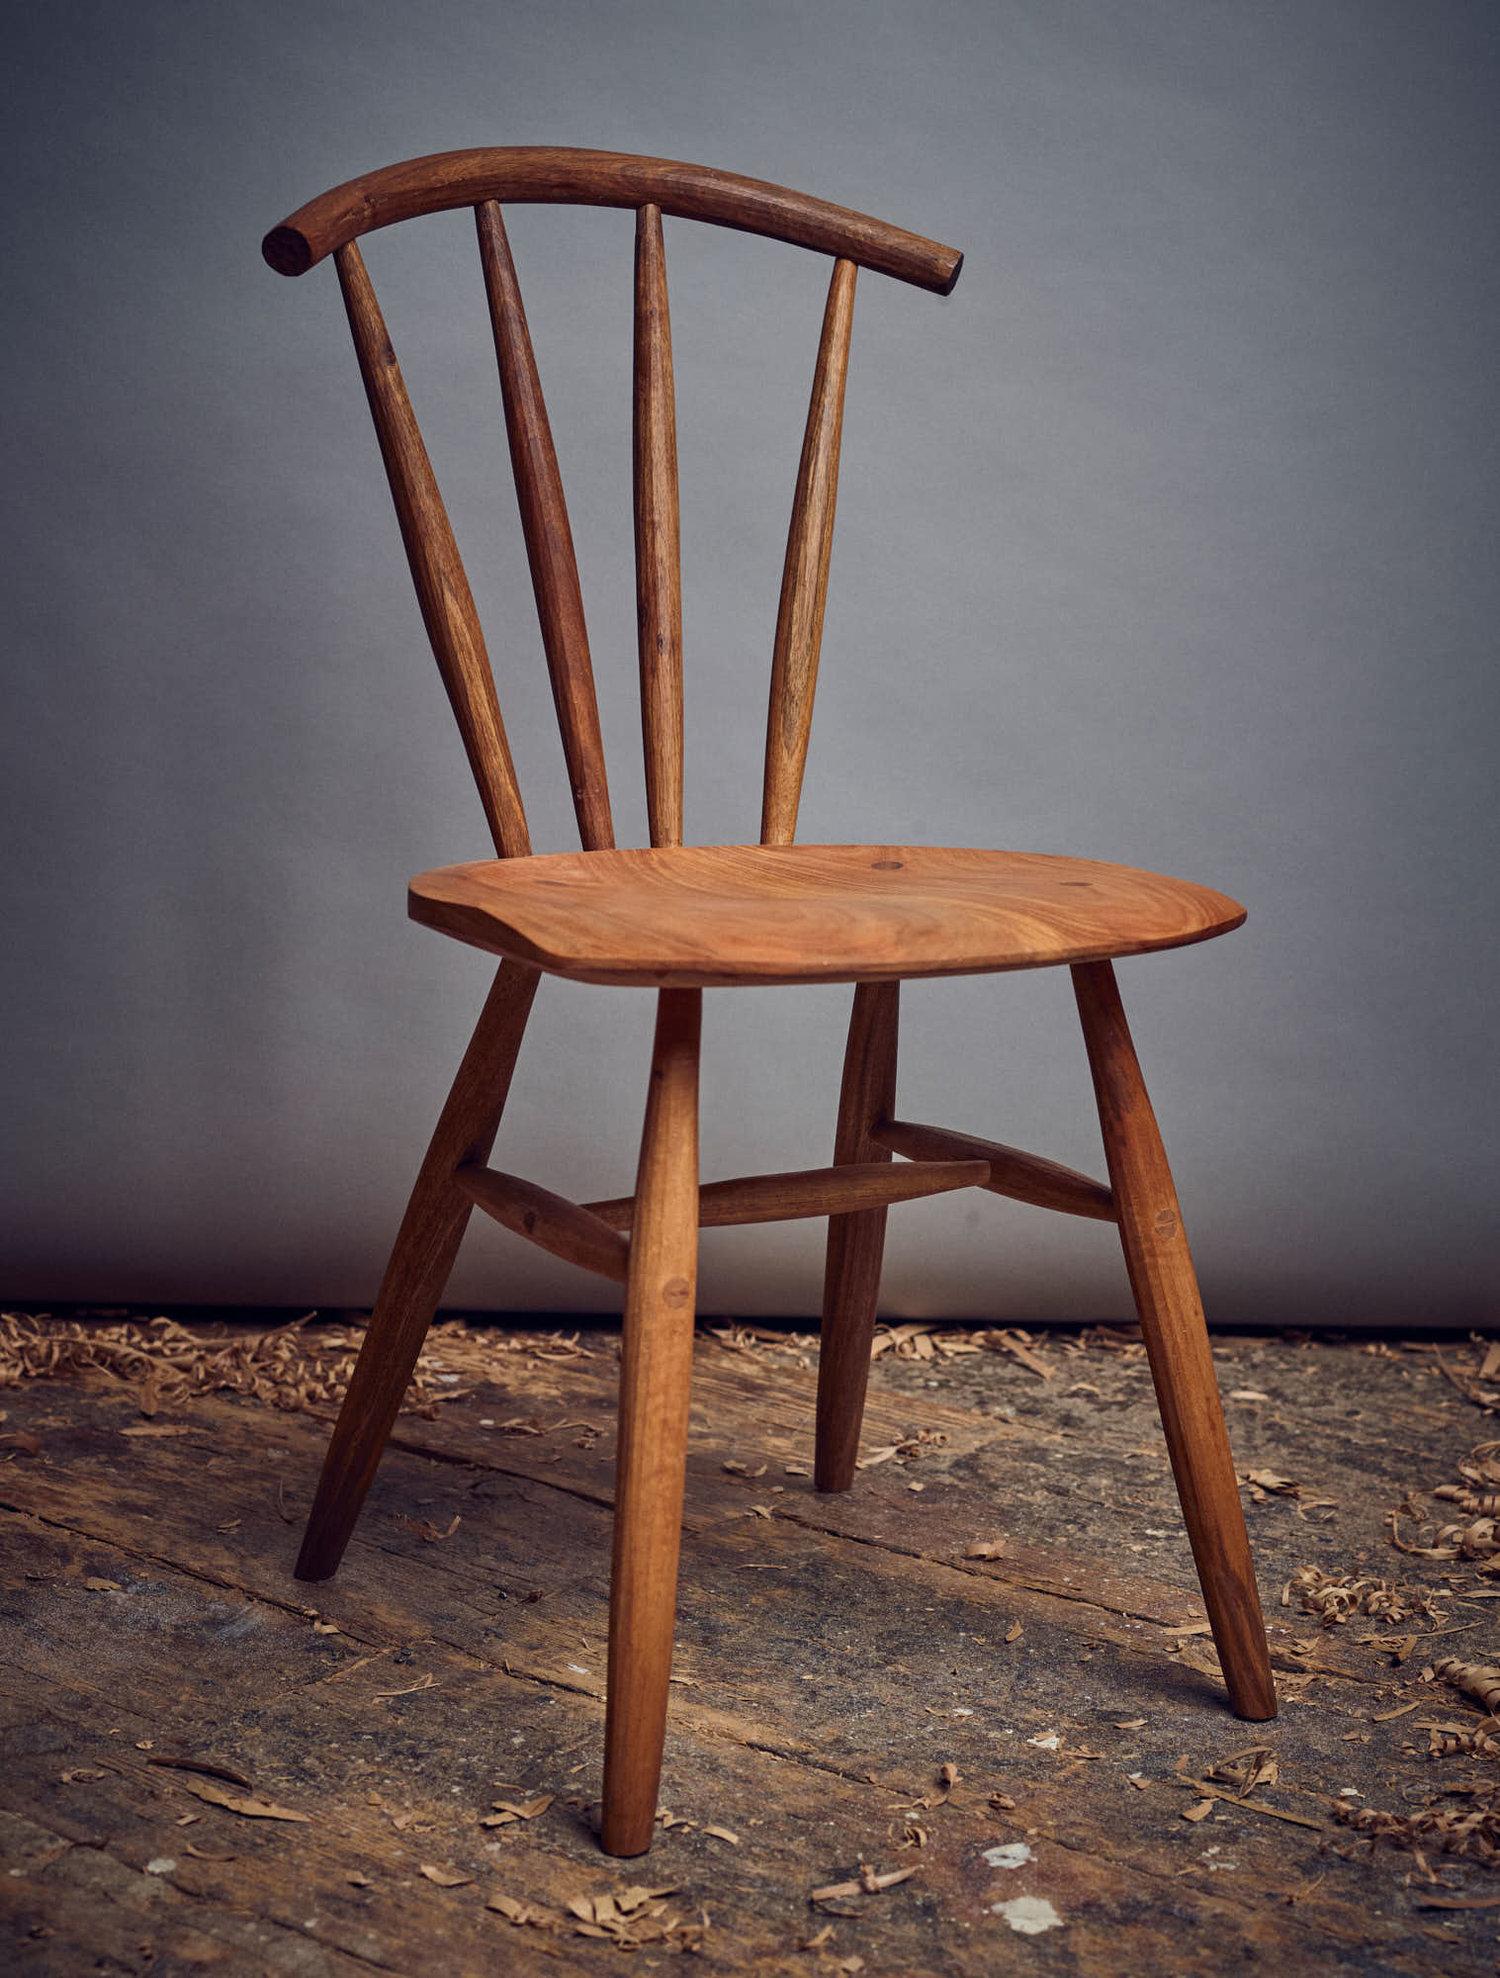 Made to order windsor chair by German Woodworker Fabian Fischer. Made in the tradition and quality of American Studio craftsmanship. The price reflects the Chair made in oak but can also be made in cherry and walnut for a 10% addition on the price